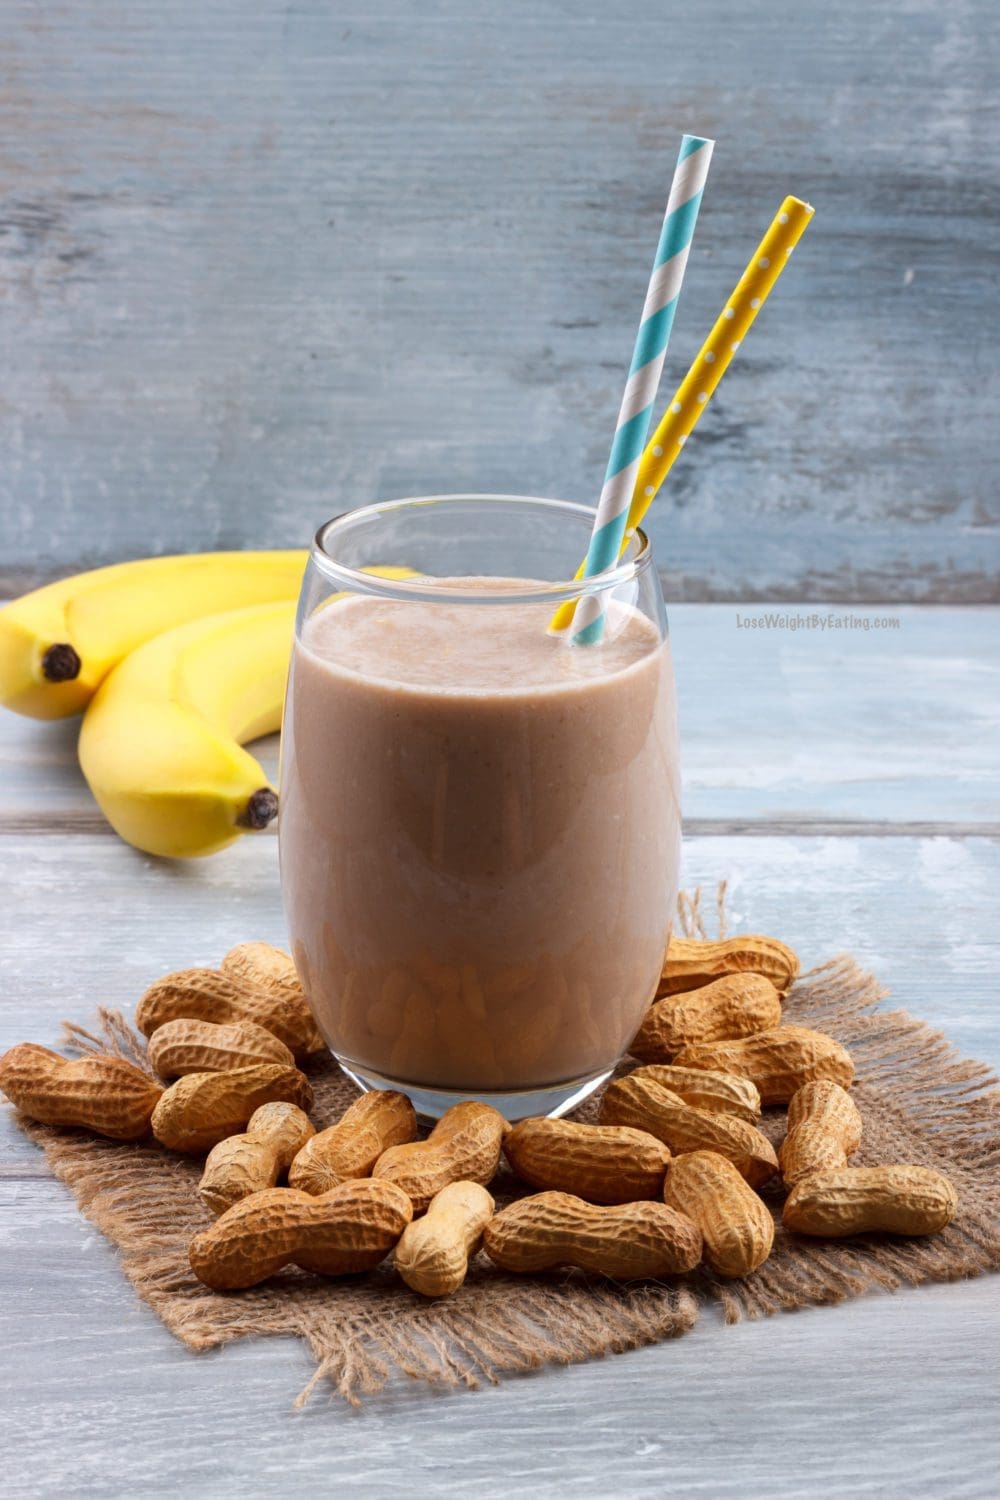 Healthy Peanut Butter Banana Smoothie